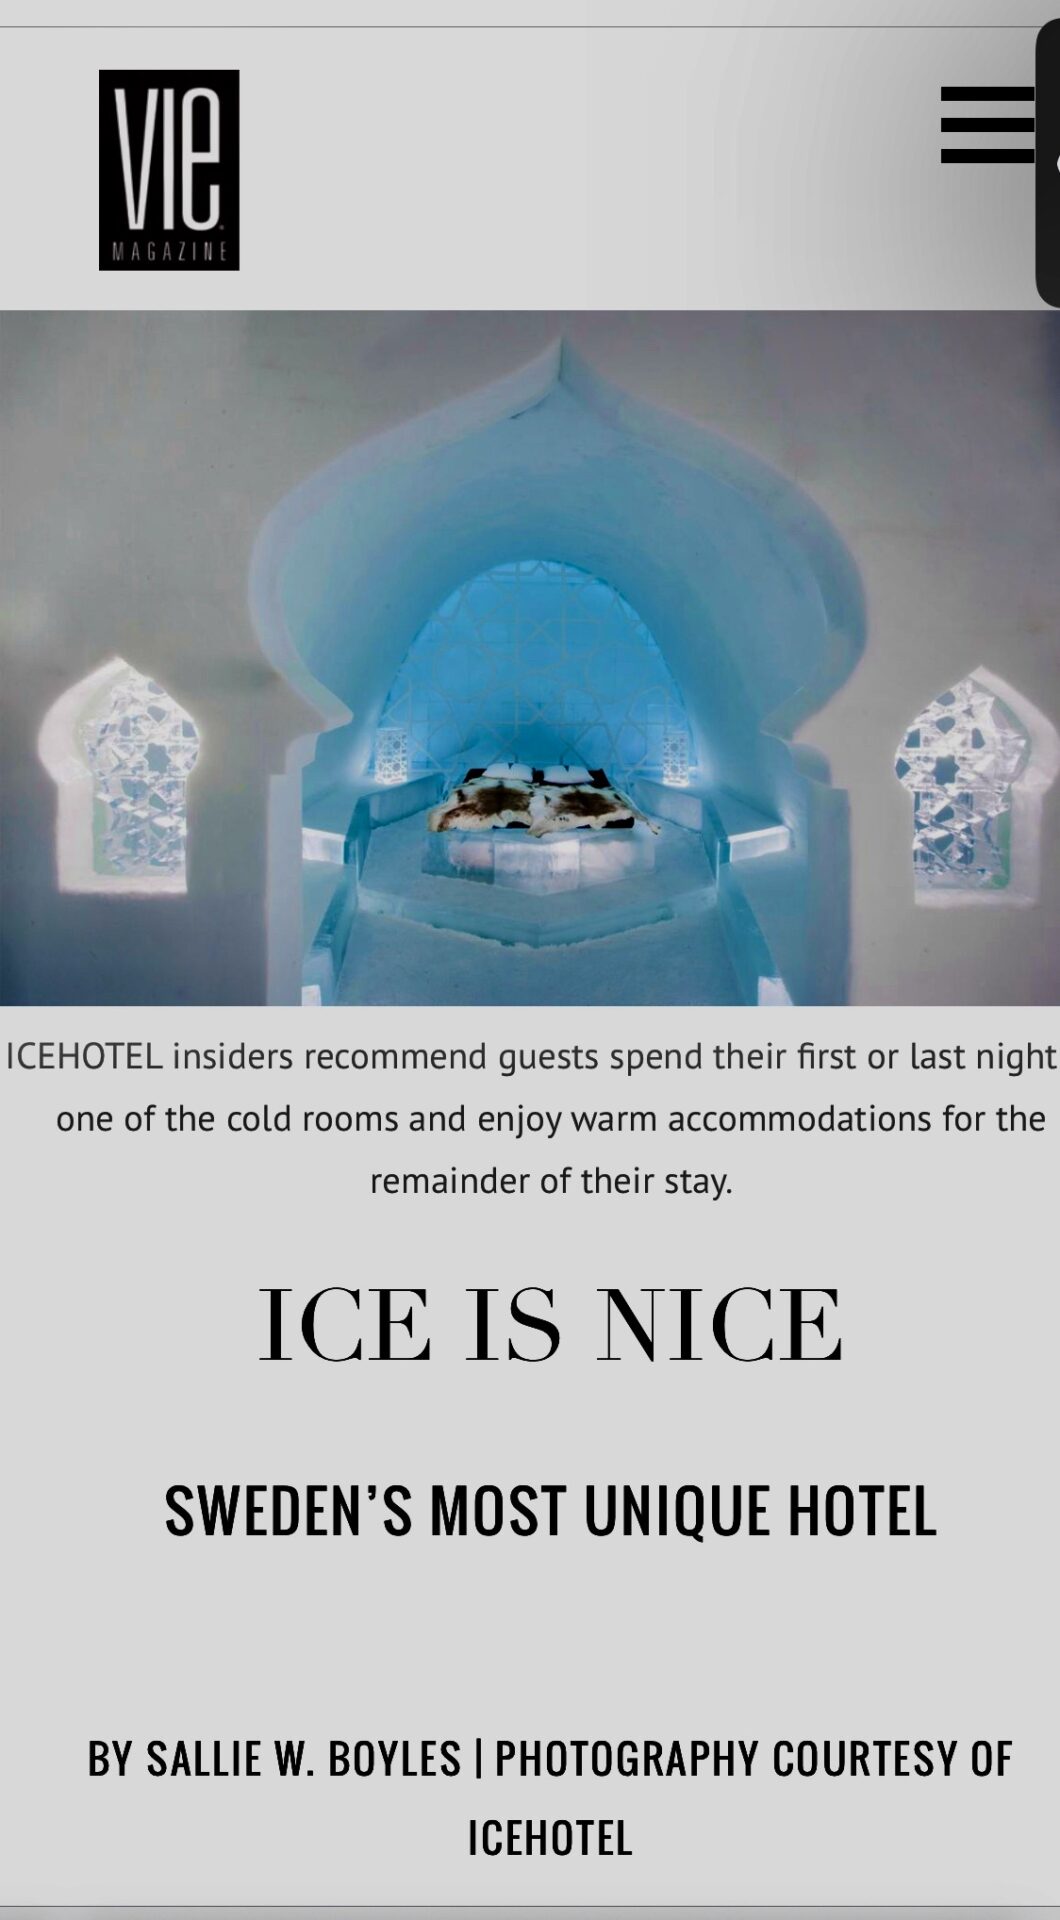 A picture of an ice hotel with text.